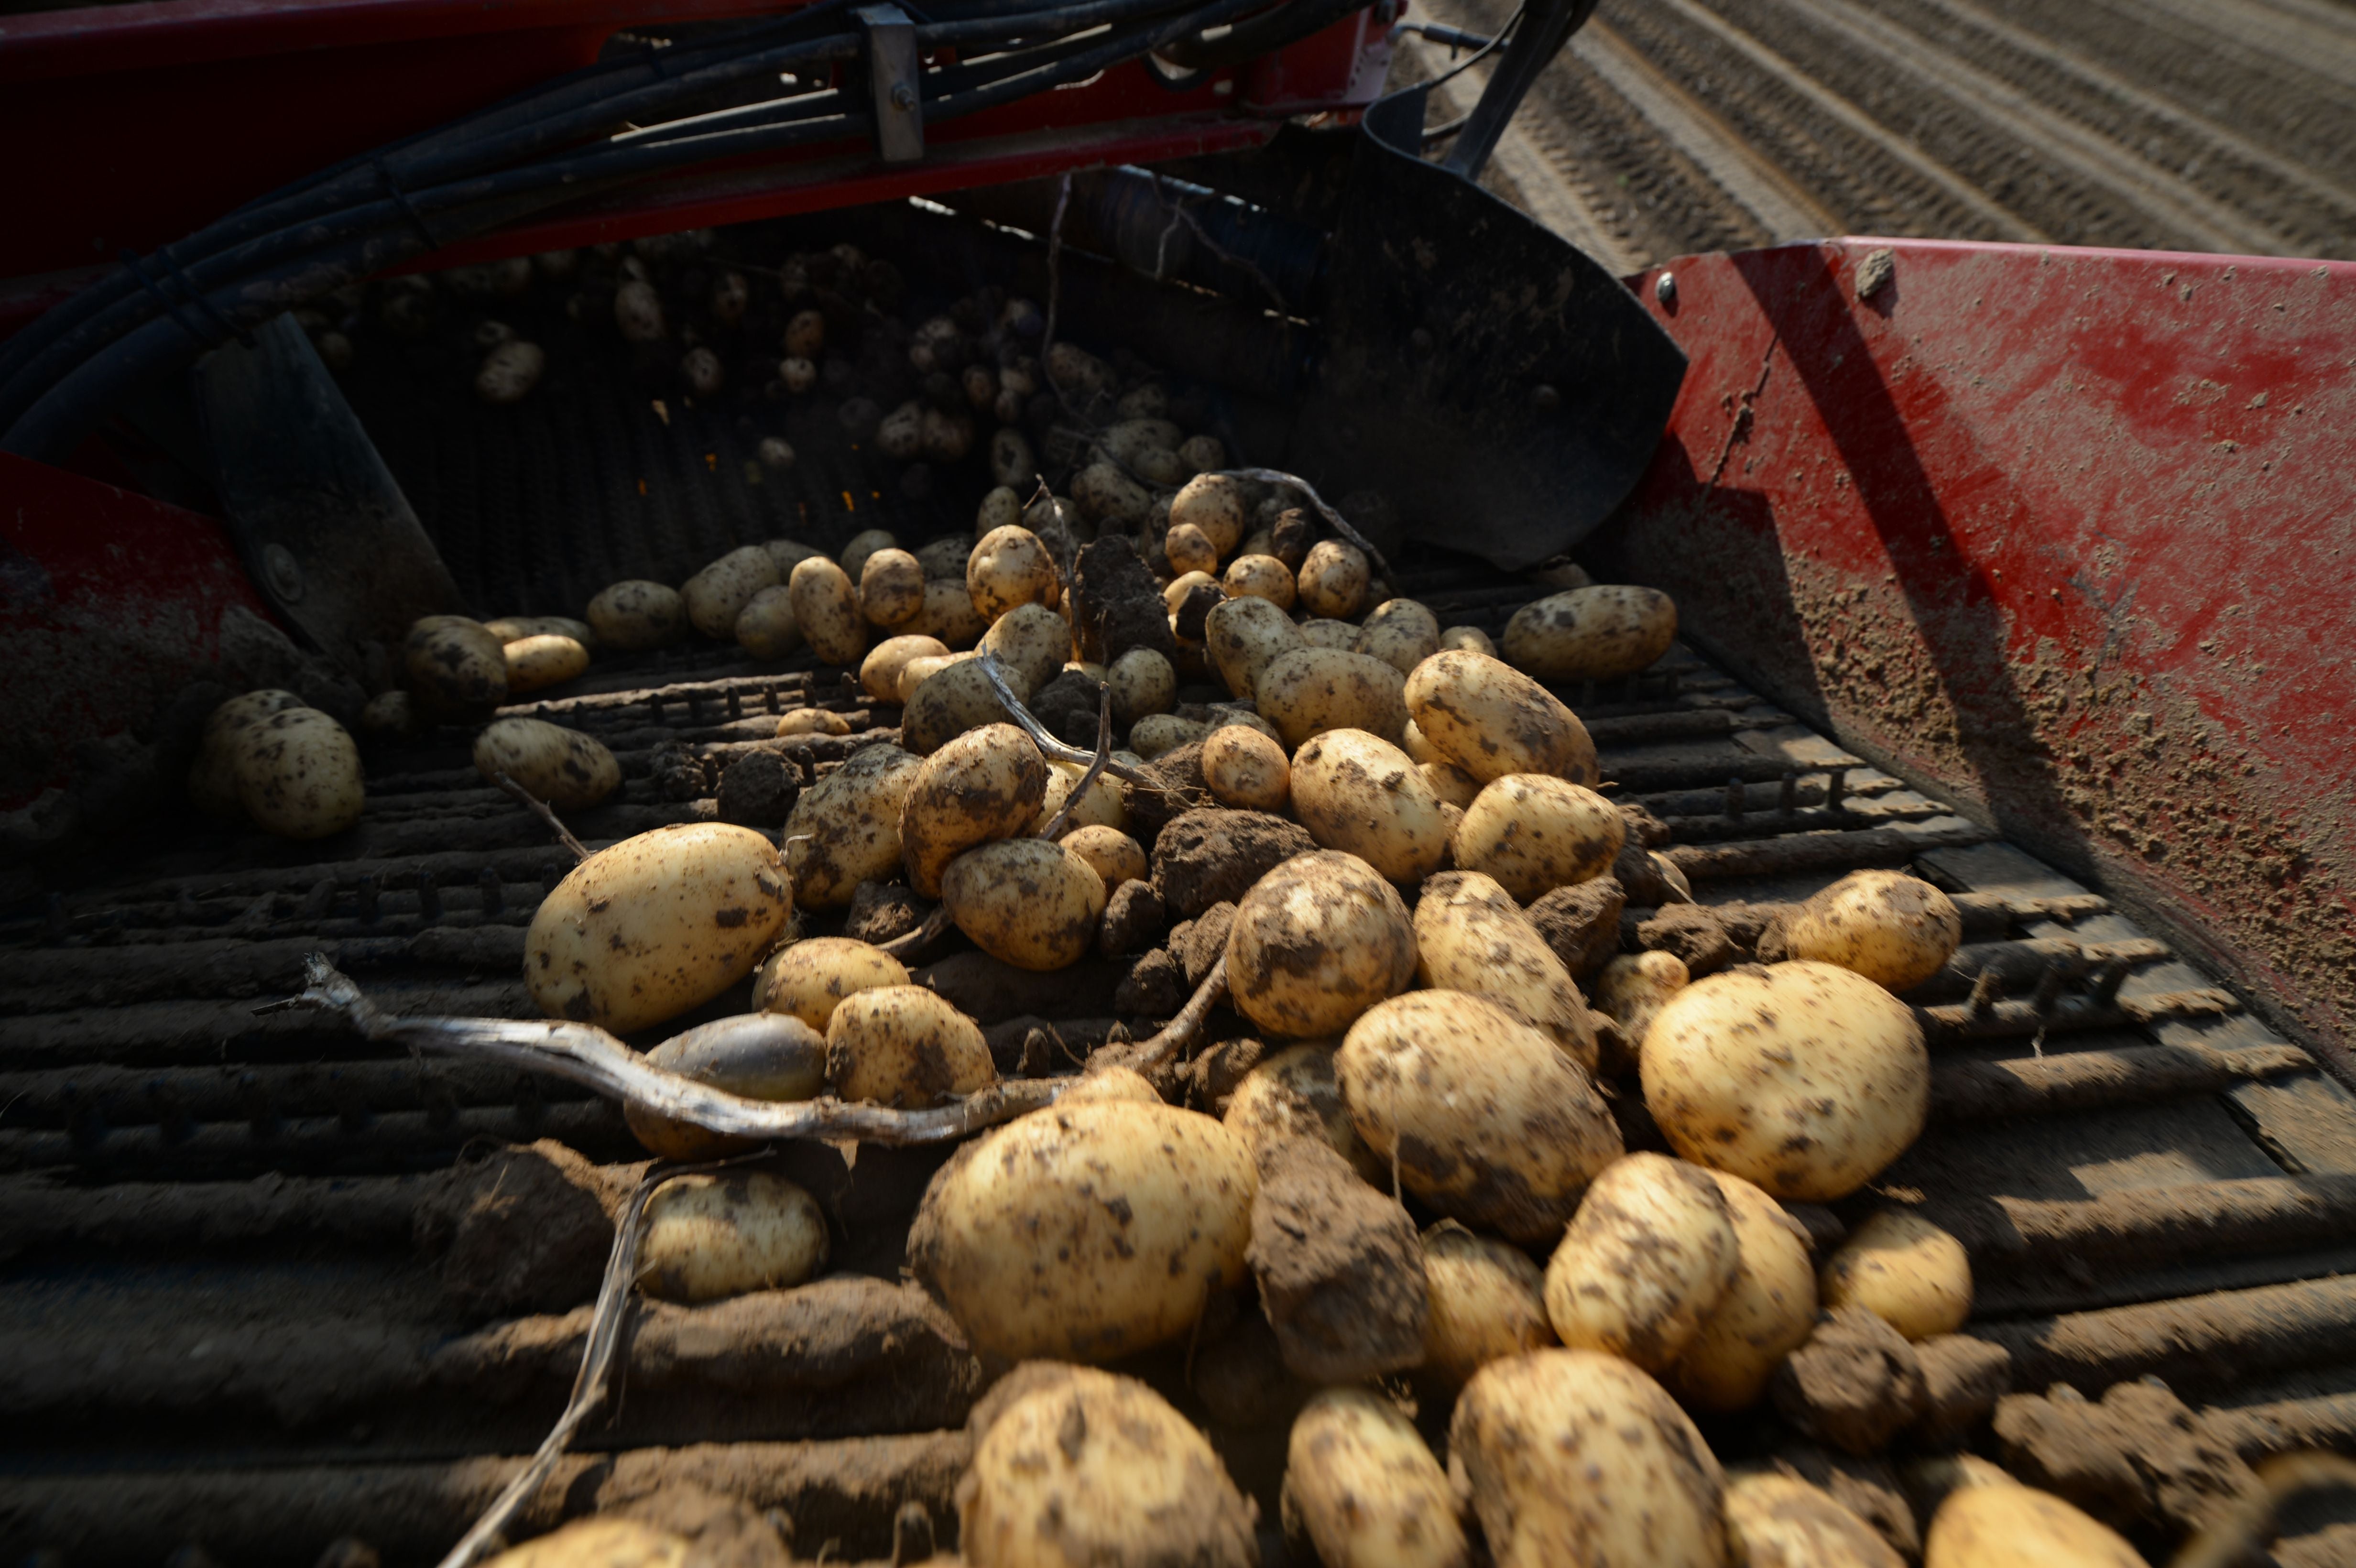 File: A photo shows potatoes on a conveyor belt of a potato harvester in Godonville, central France